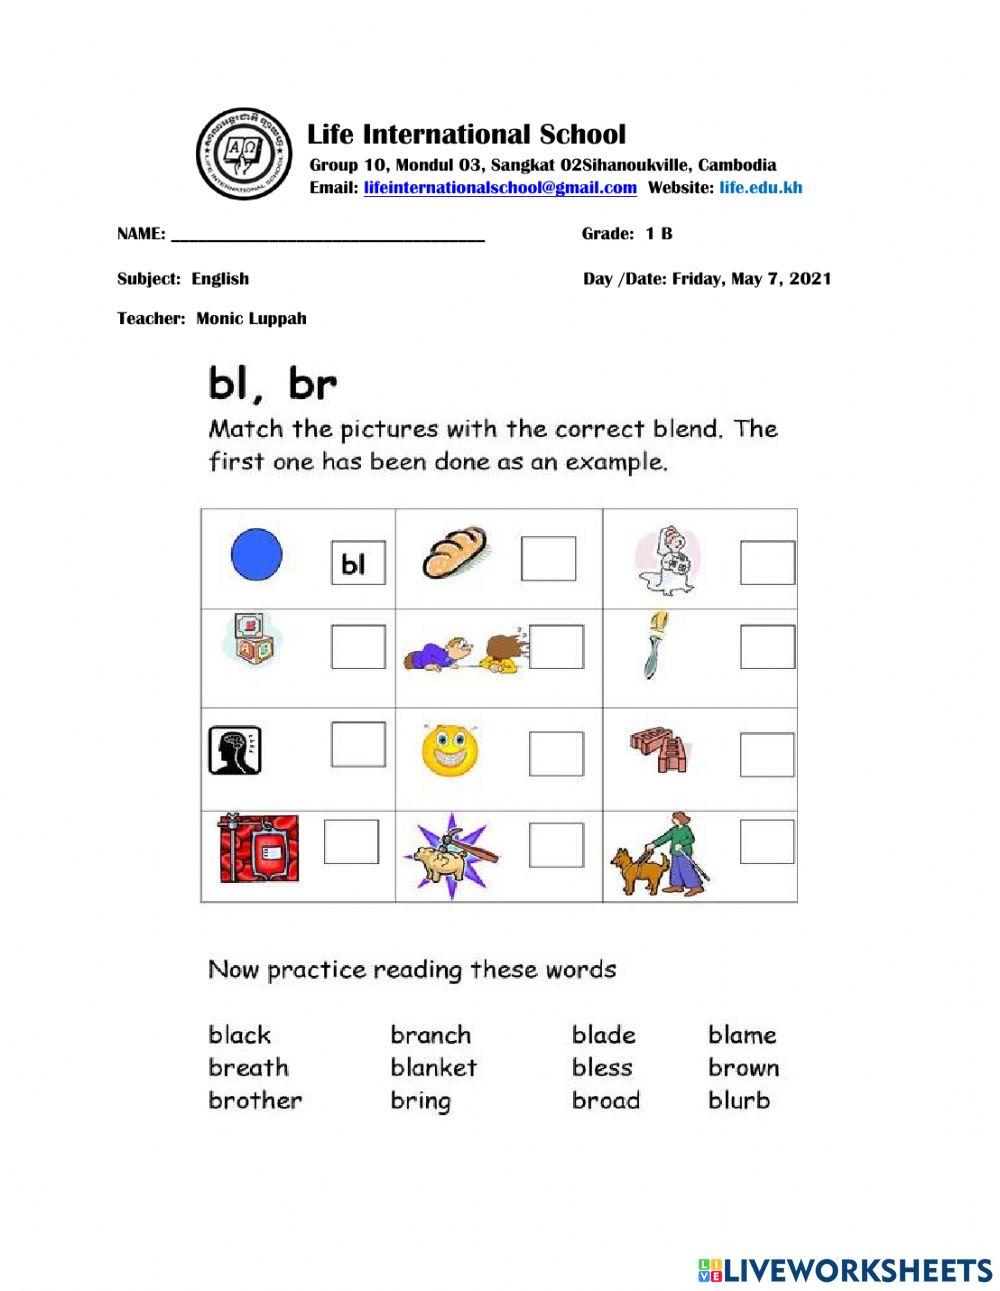 Consonant Blend BL and BR Words